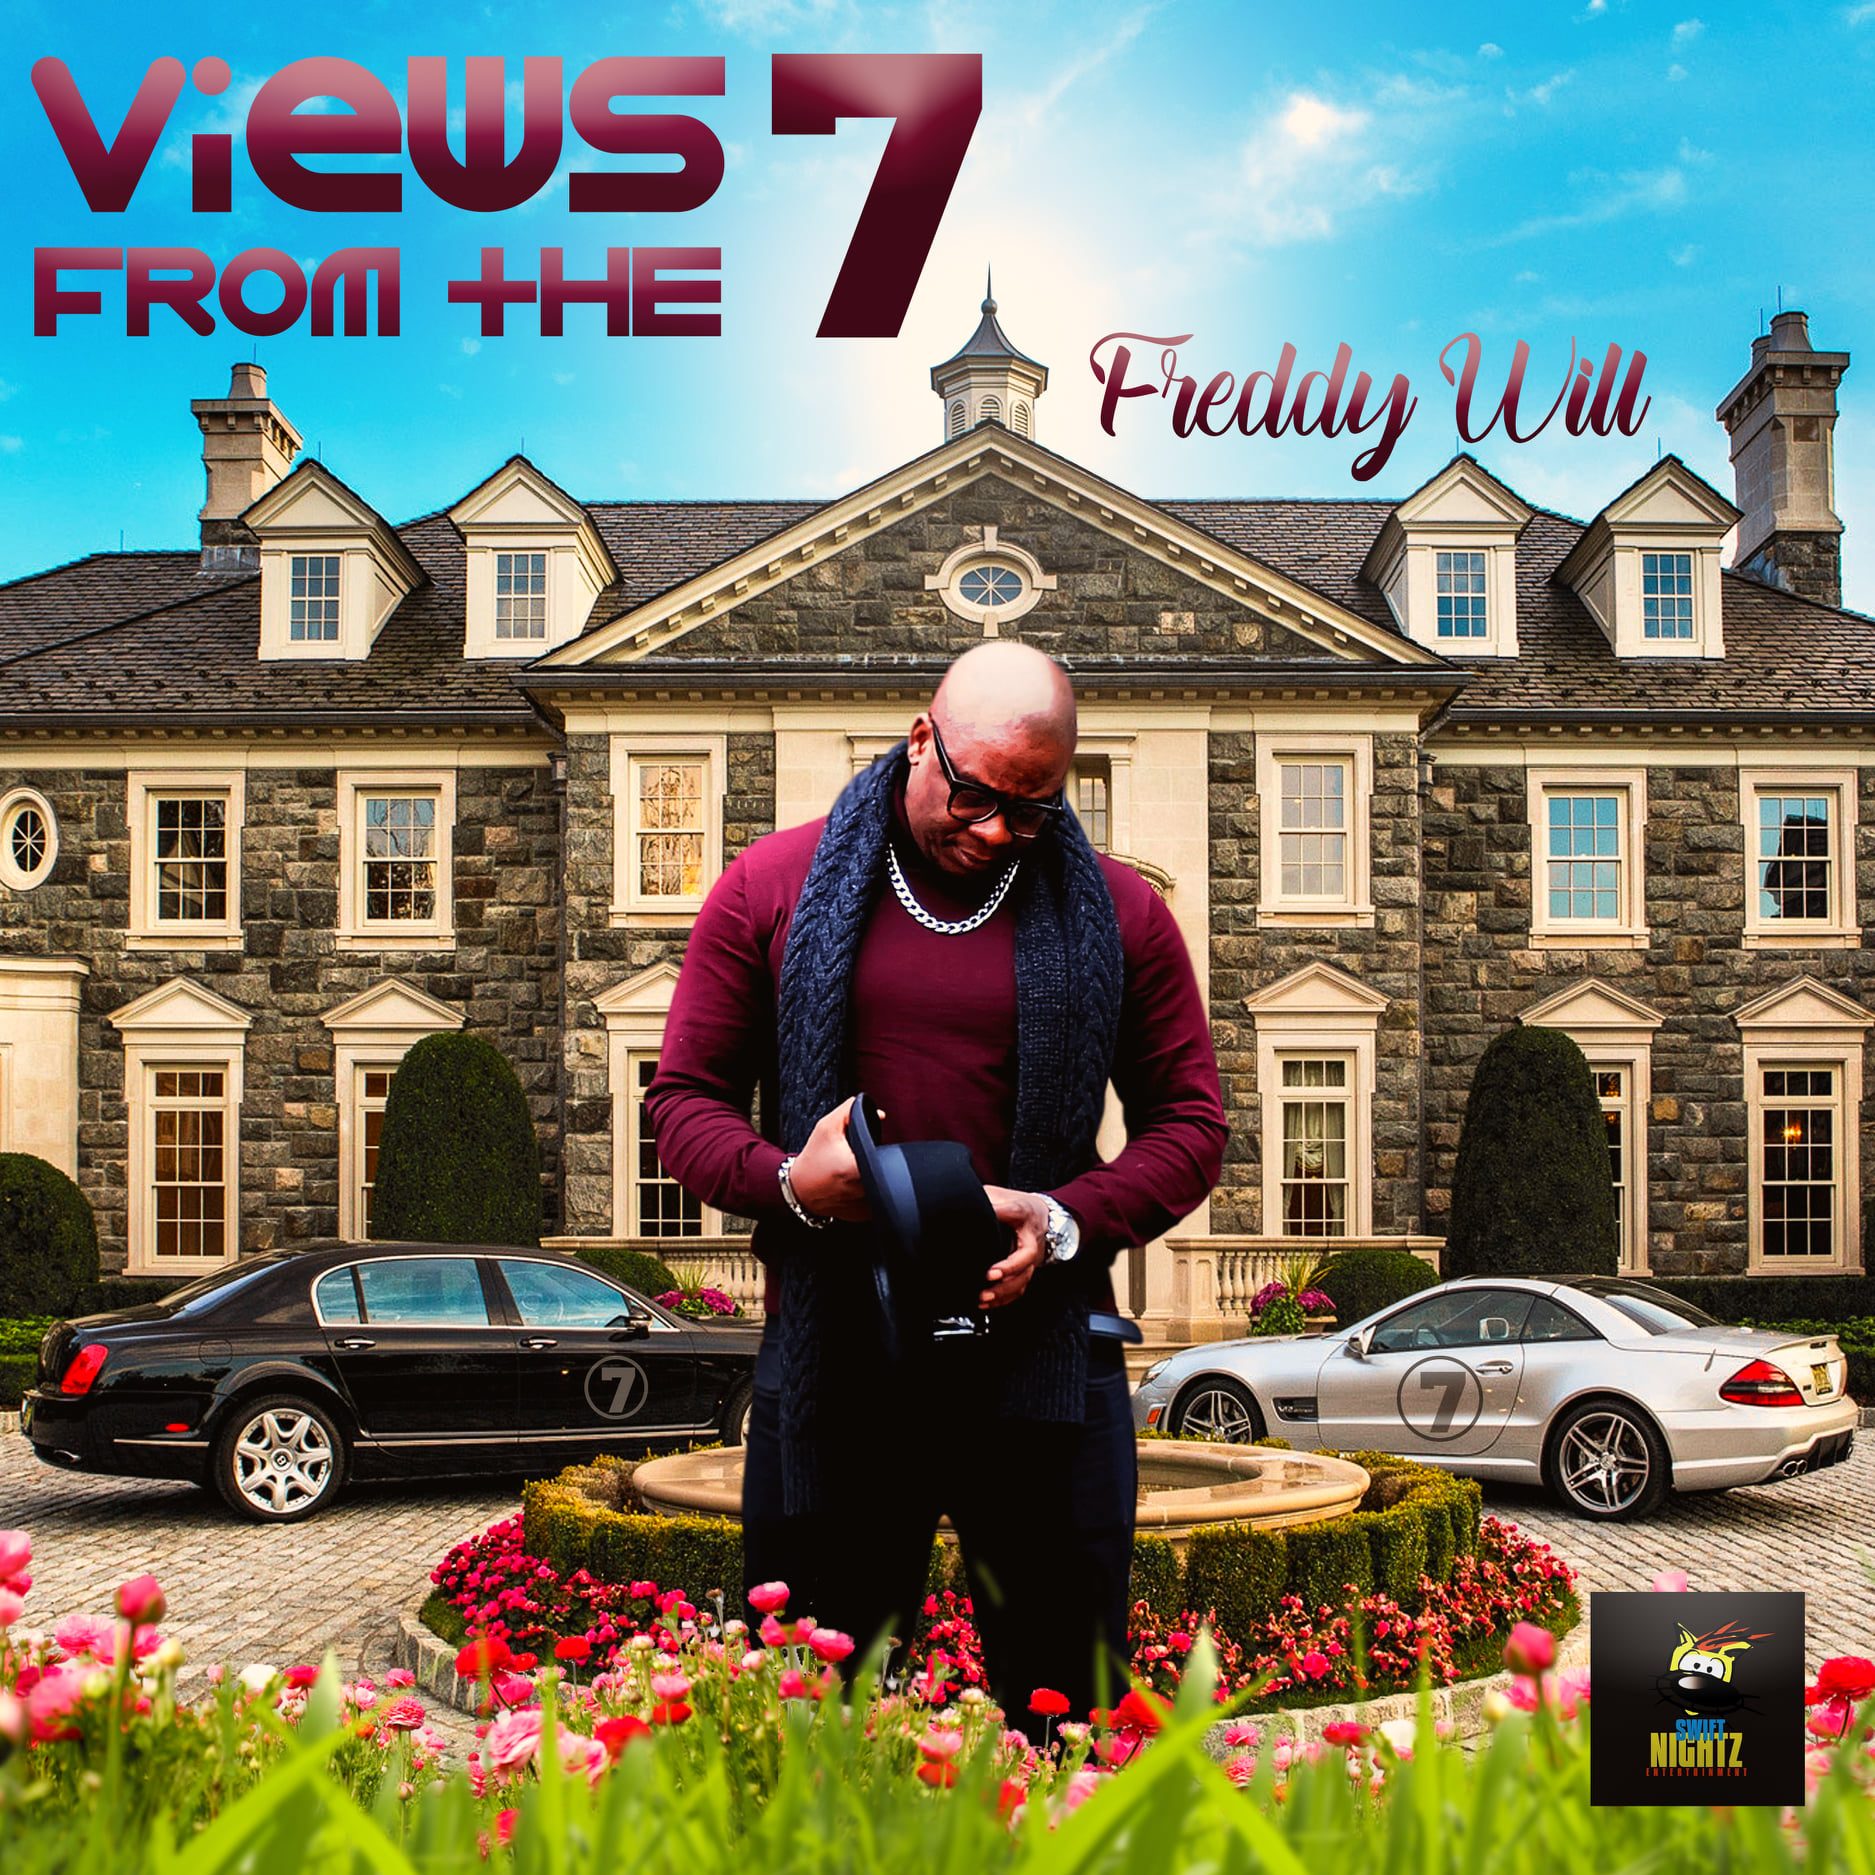 A poster on drake inspired views from the 7 compilation album